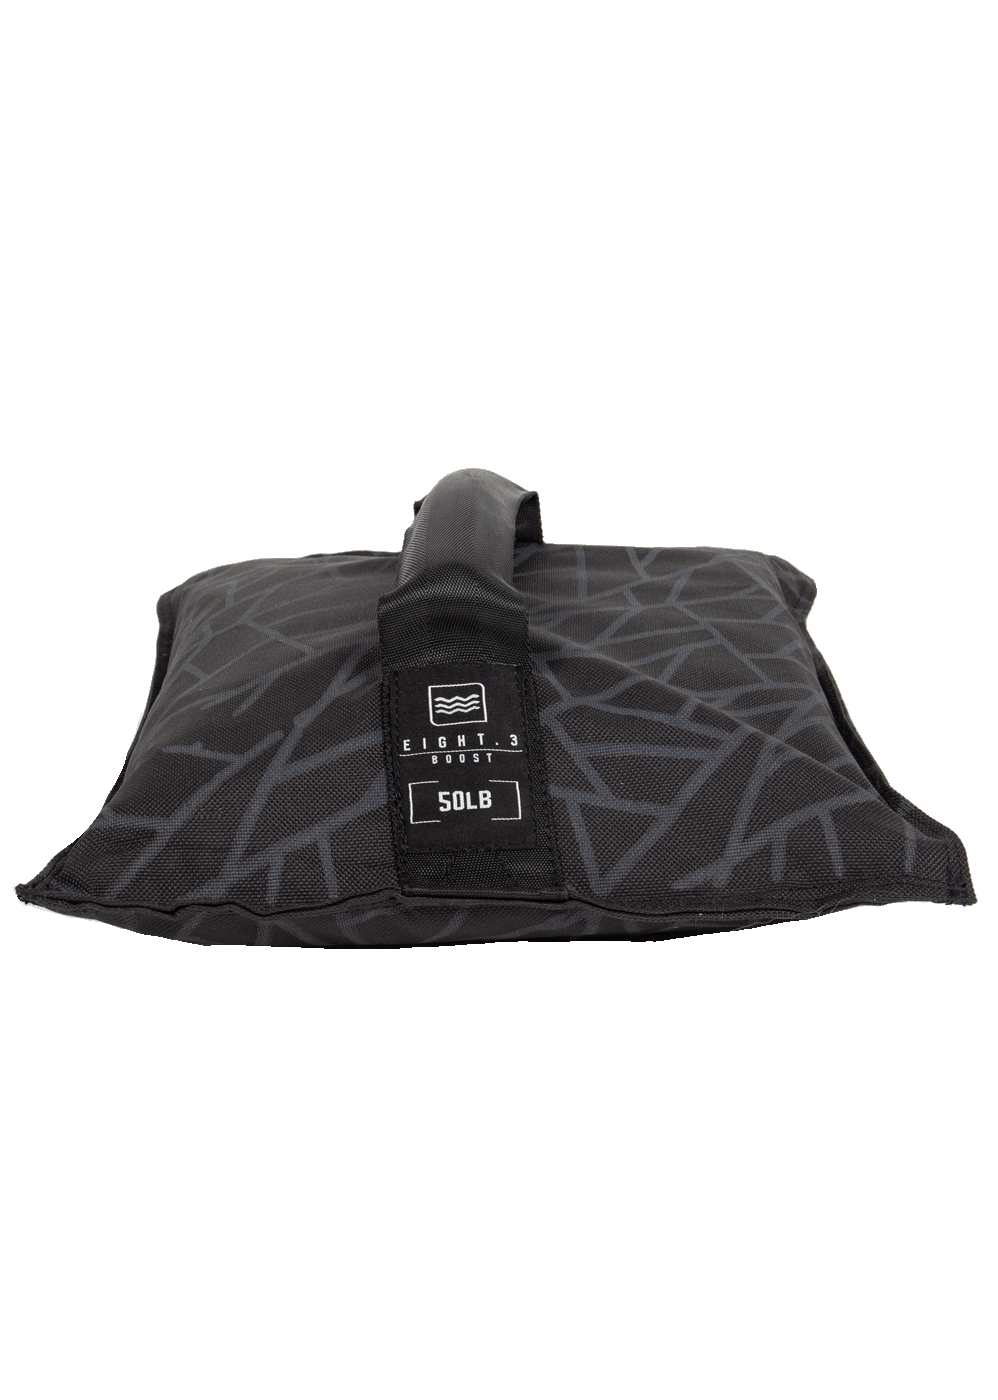 RONIX BOOST BAGS